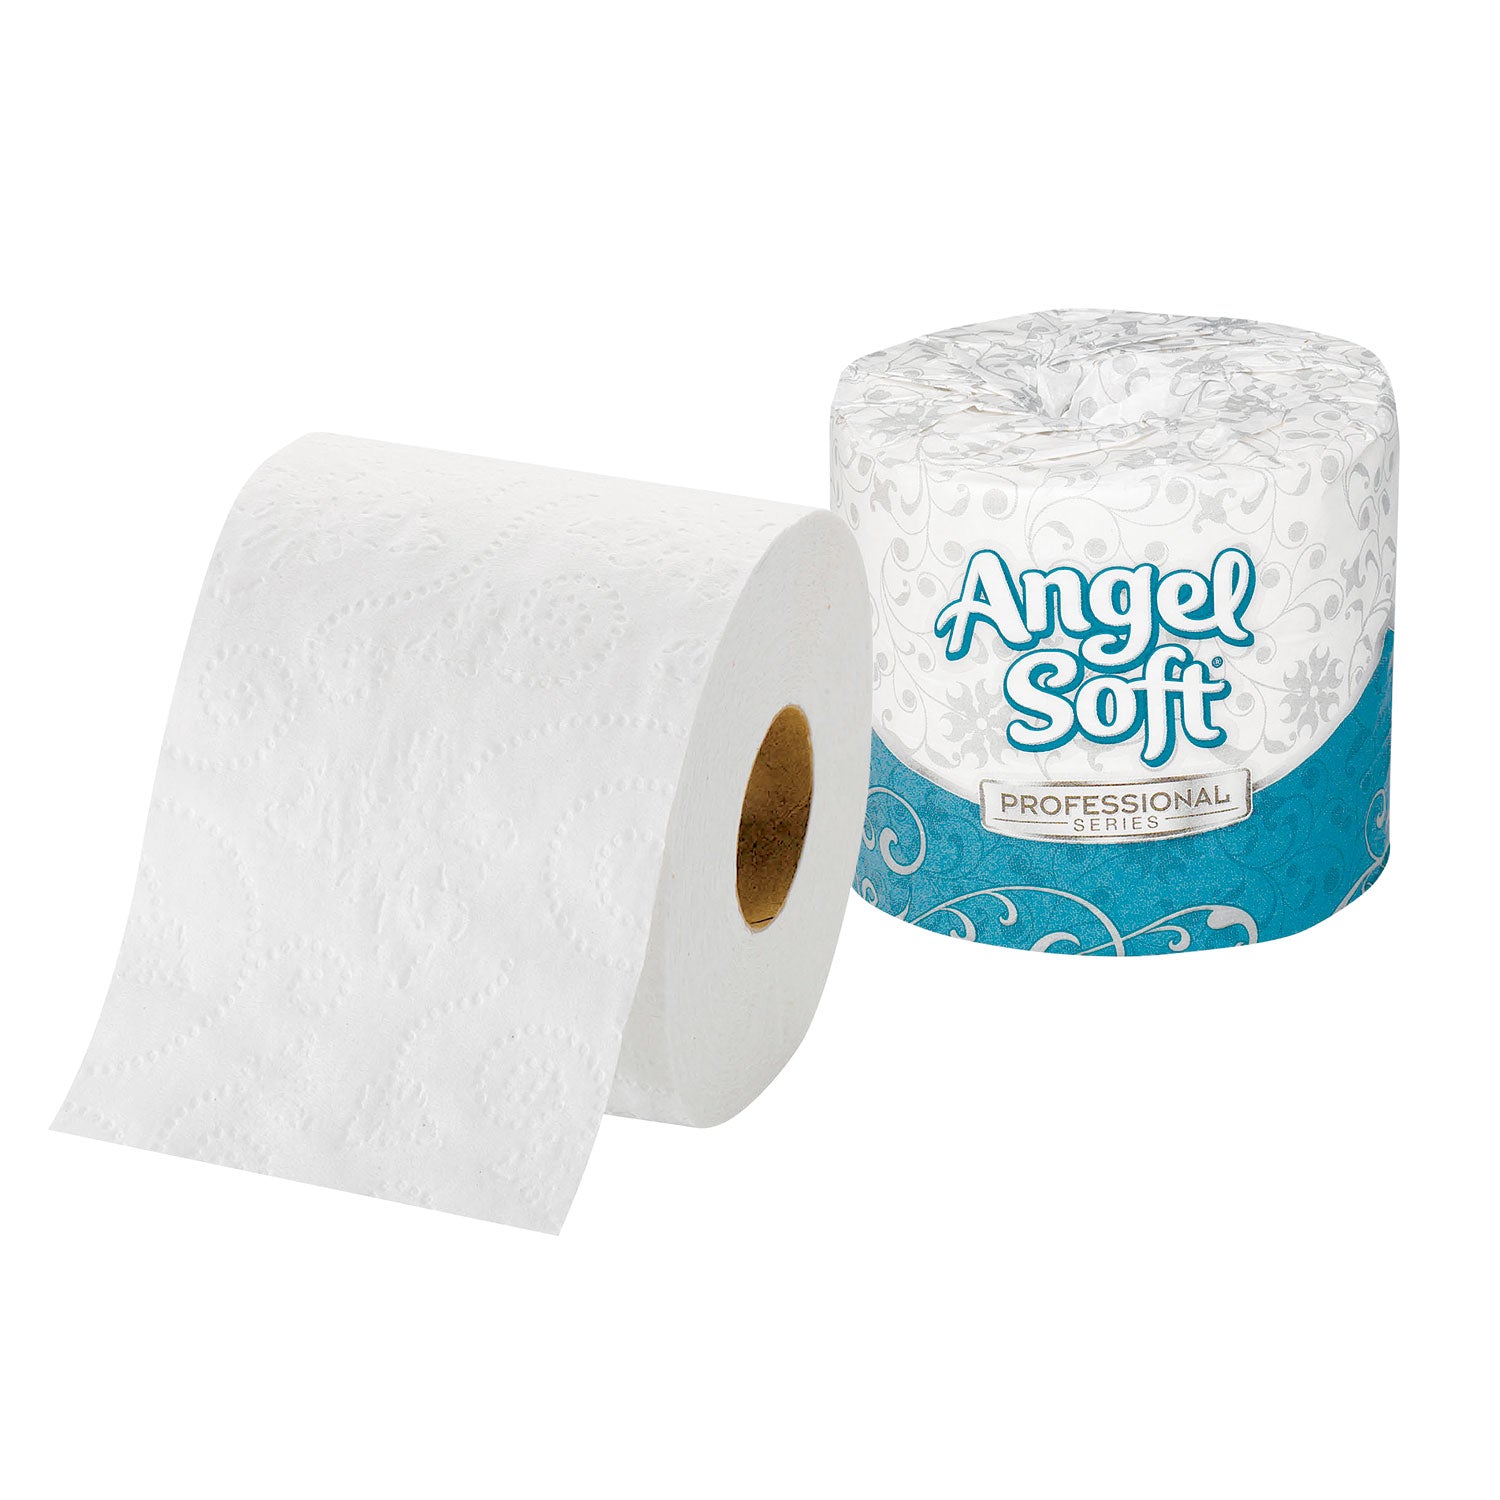 Angel Soft ps Premium Bathroom Tissue, Septic Safe, 2-Ply, White, 450 Sheets/Roll, 20 Rolls/Carton - 